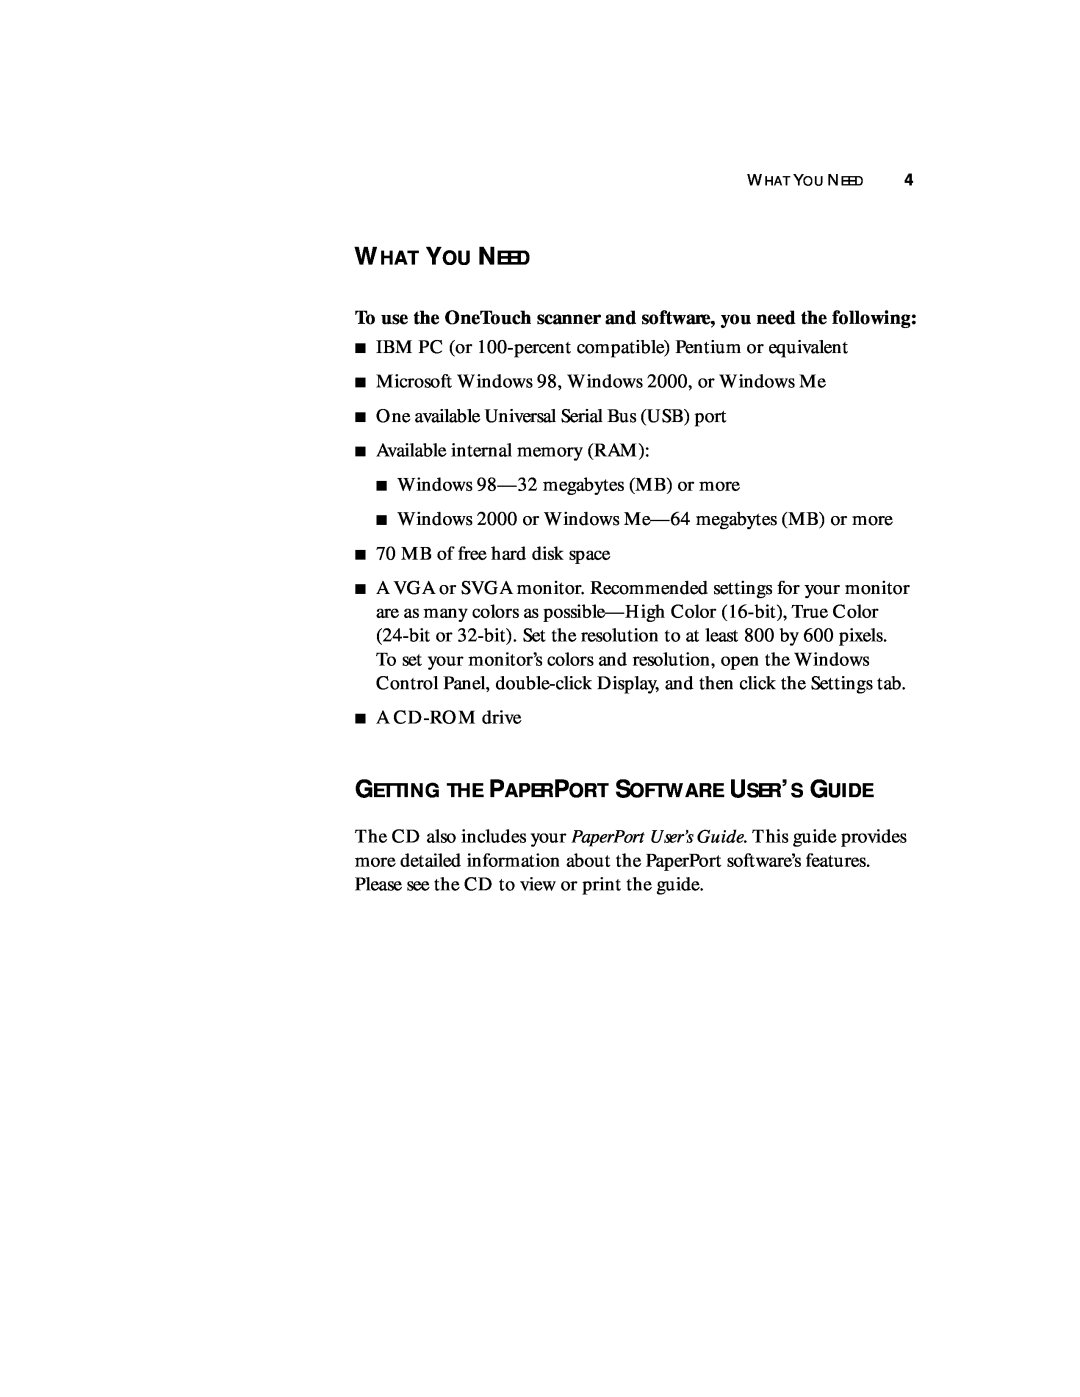 Visioneer 8900 manual What You Need, Getting The Paperport Software User’S Guide 